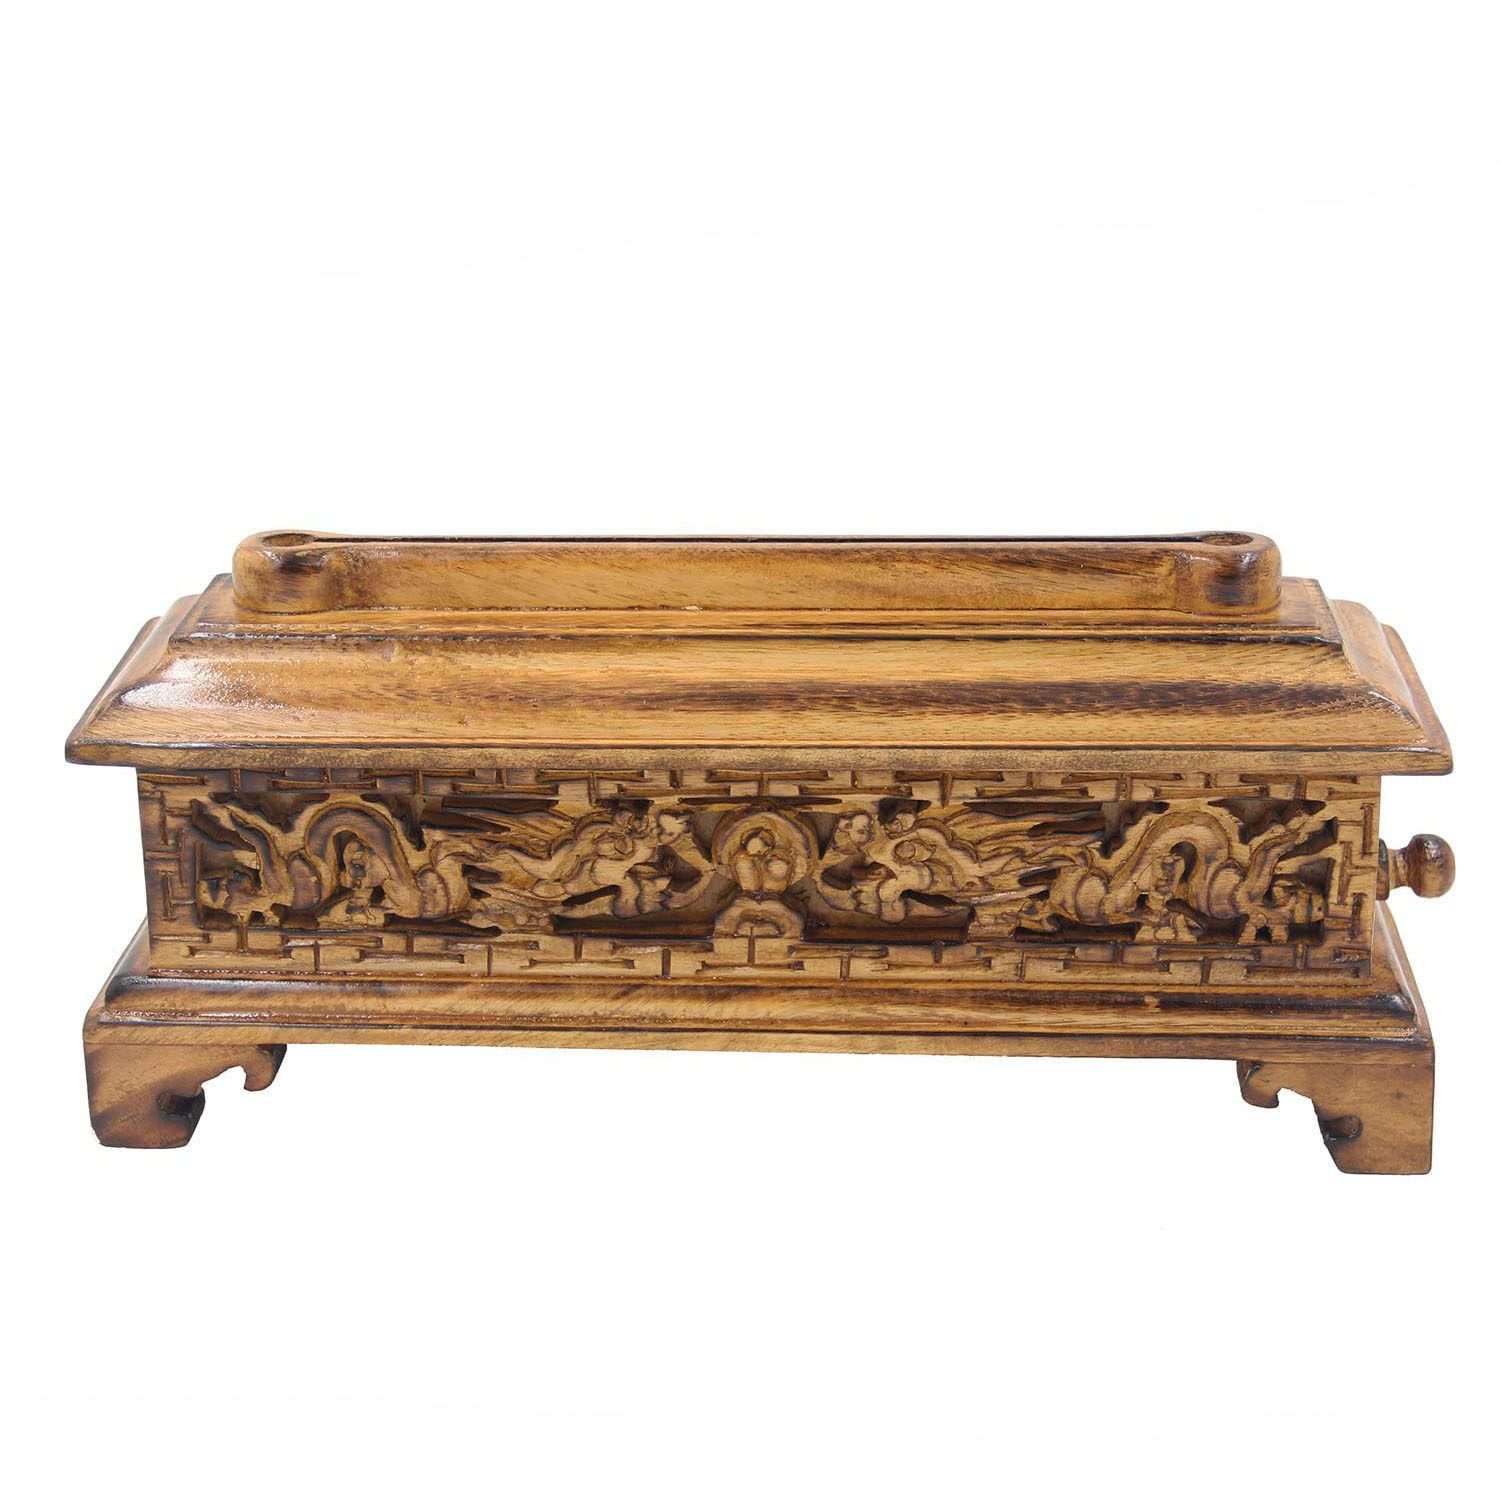 Hand Crafted Tibetan Buddhist Temple | Solid Wooden Incense Burner with Storage (Large)